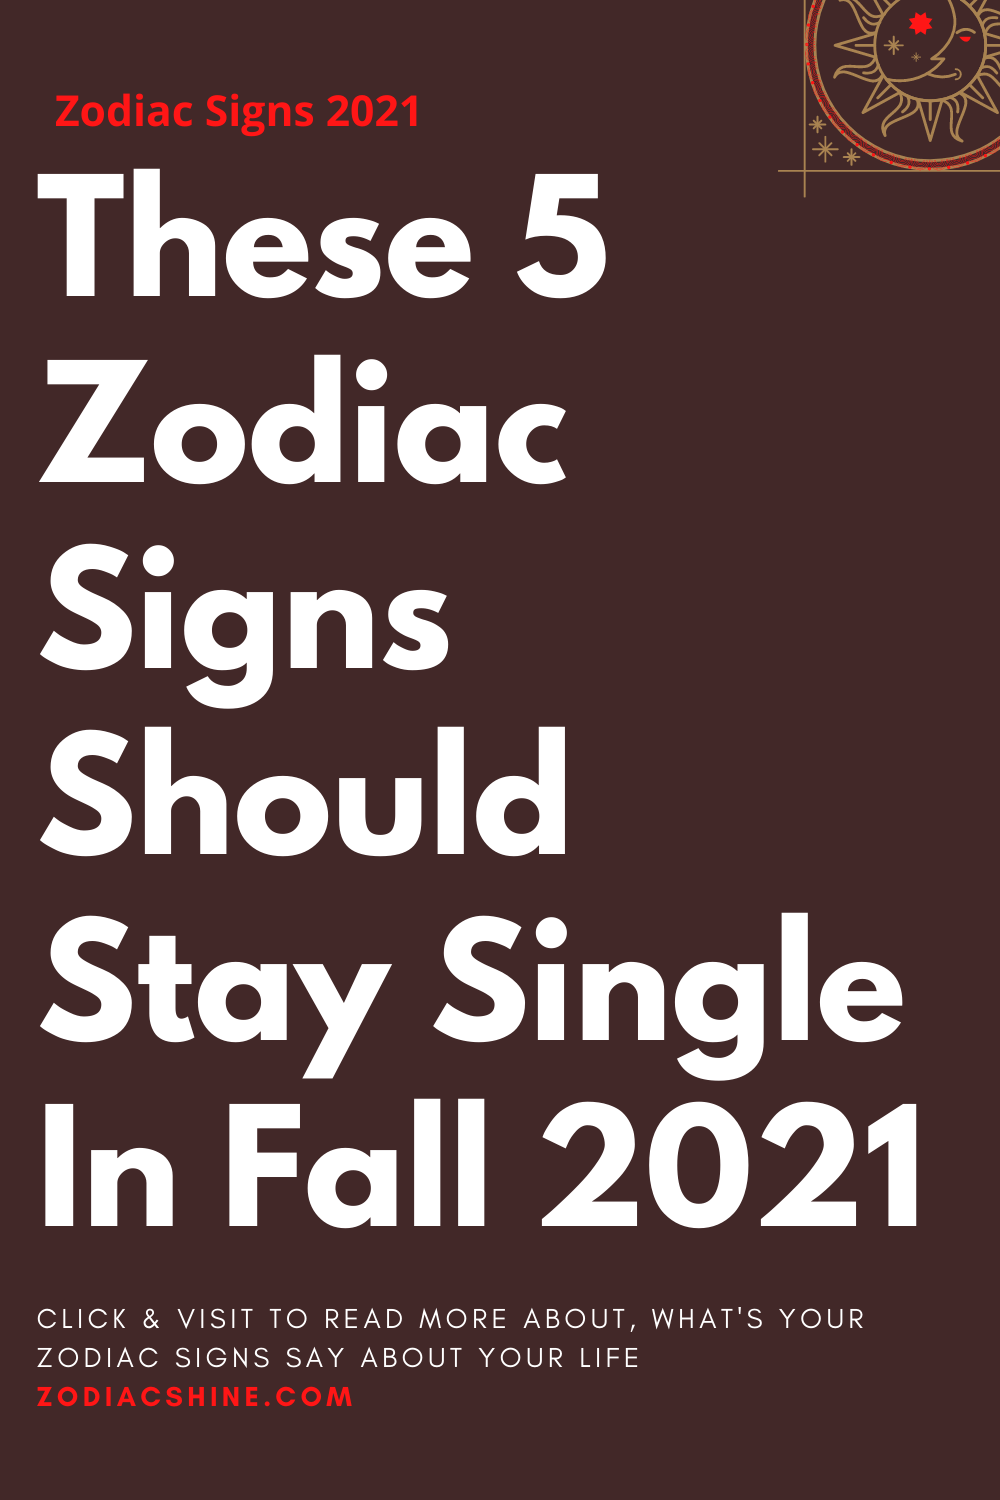 These 5 Zodiac Signs Should Stay Single In Fall 2021